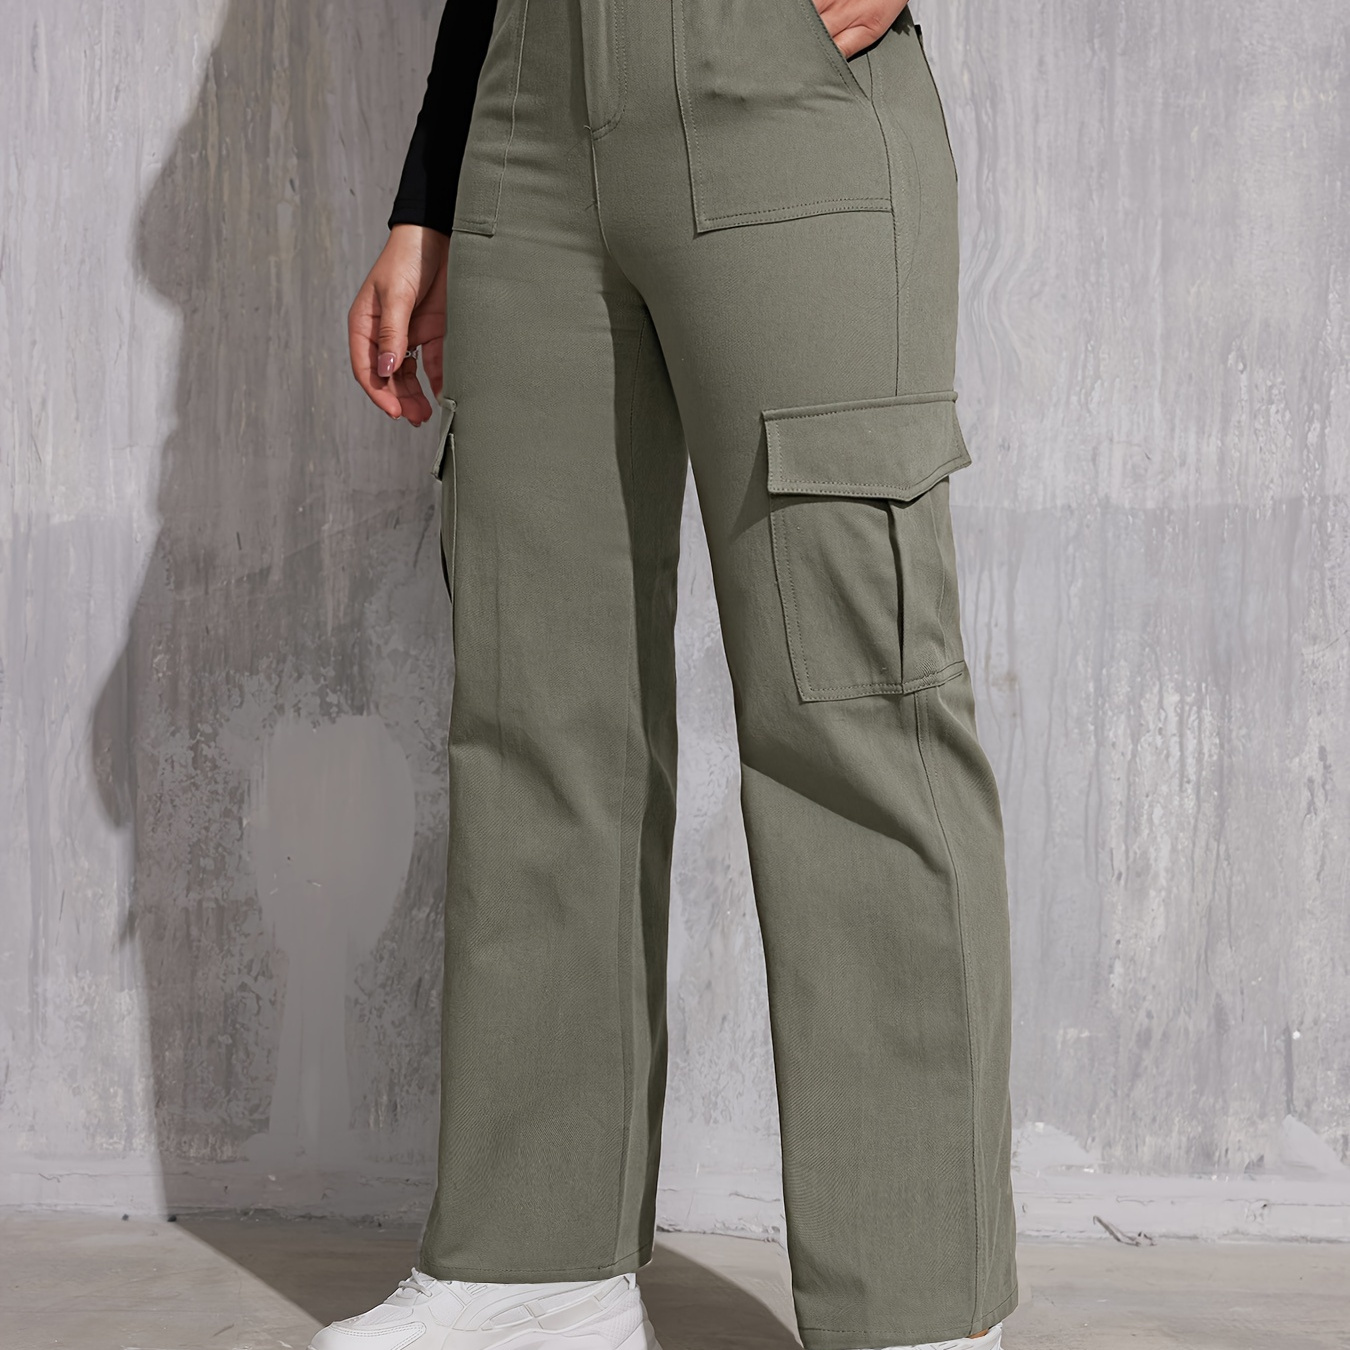 

Solid Straight Leg Cargo Pants, Casual Cotton Pants With Pocket, Women's Clothing